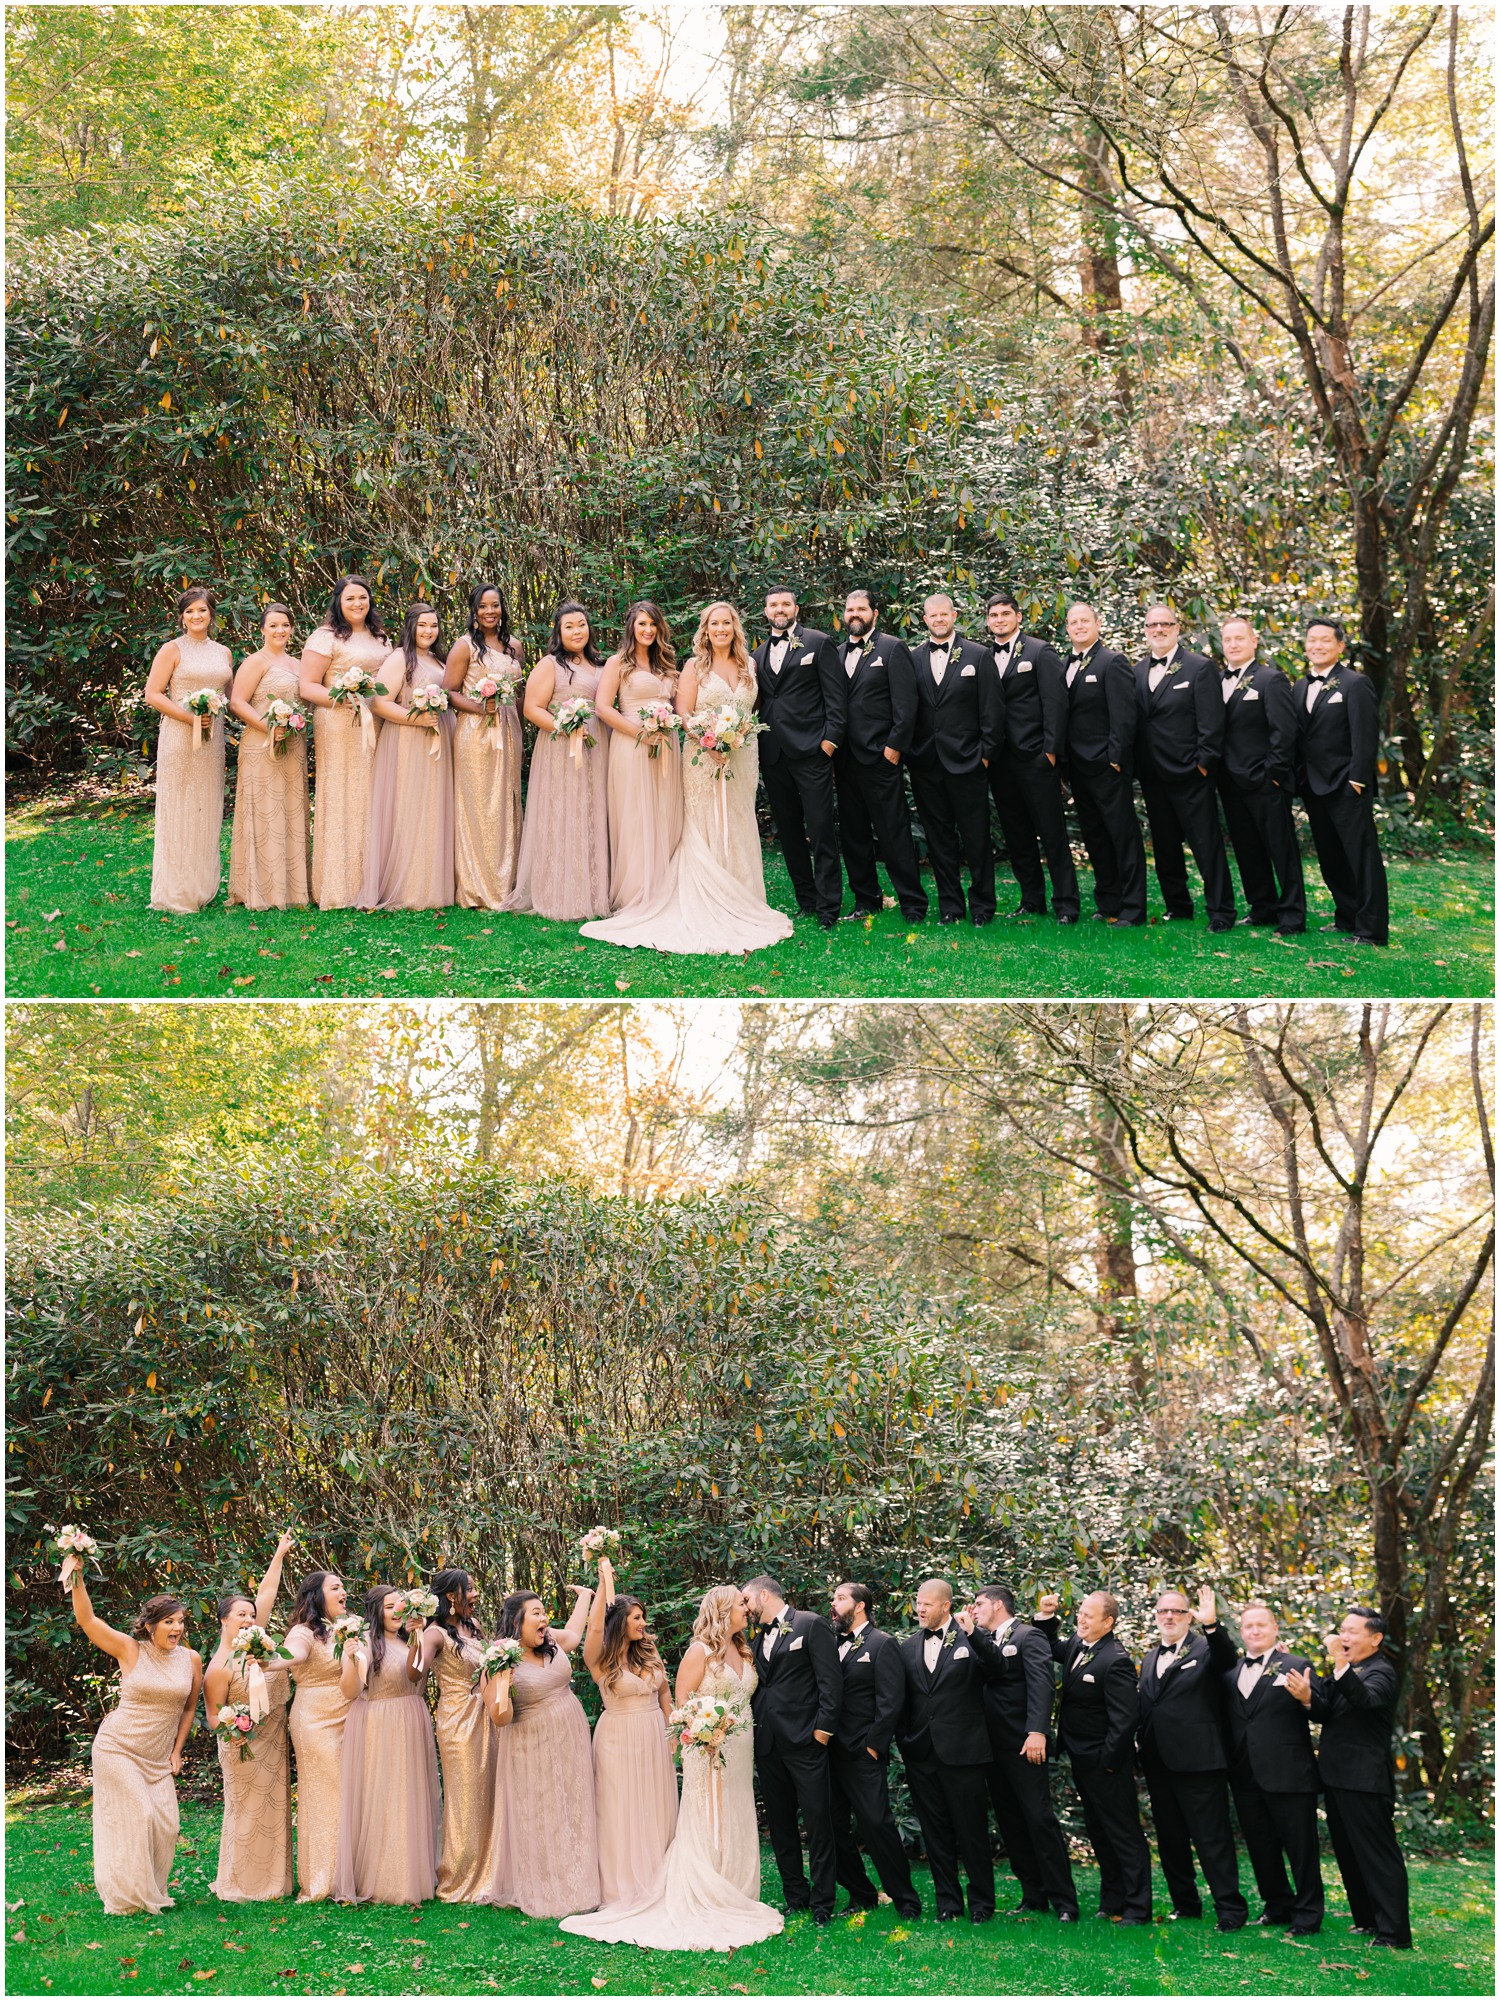 fall bridal party portraits with bridesmaids in pink and rose gold gowns and groomsmen in black suits